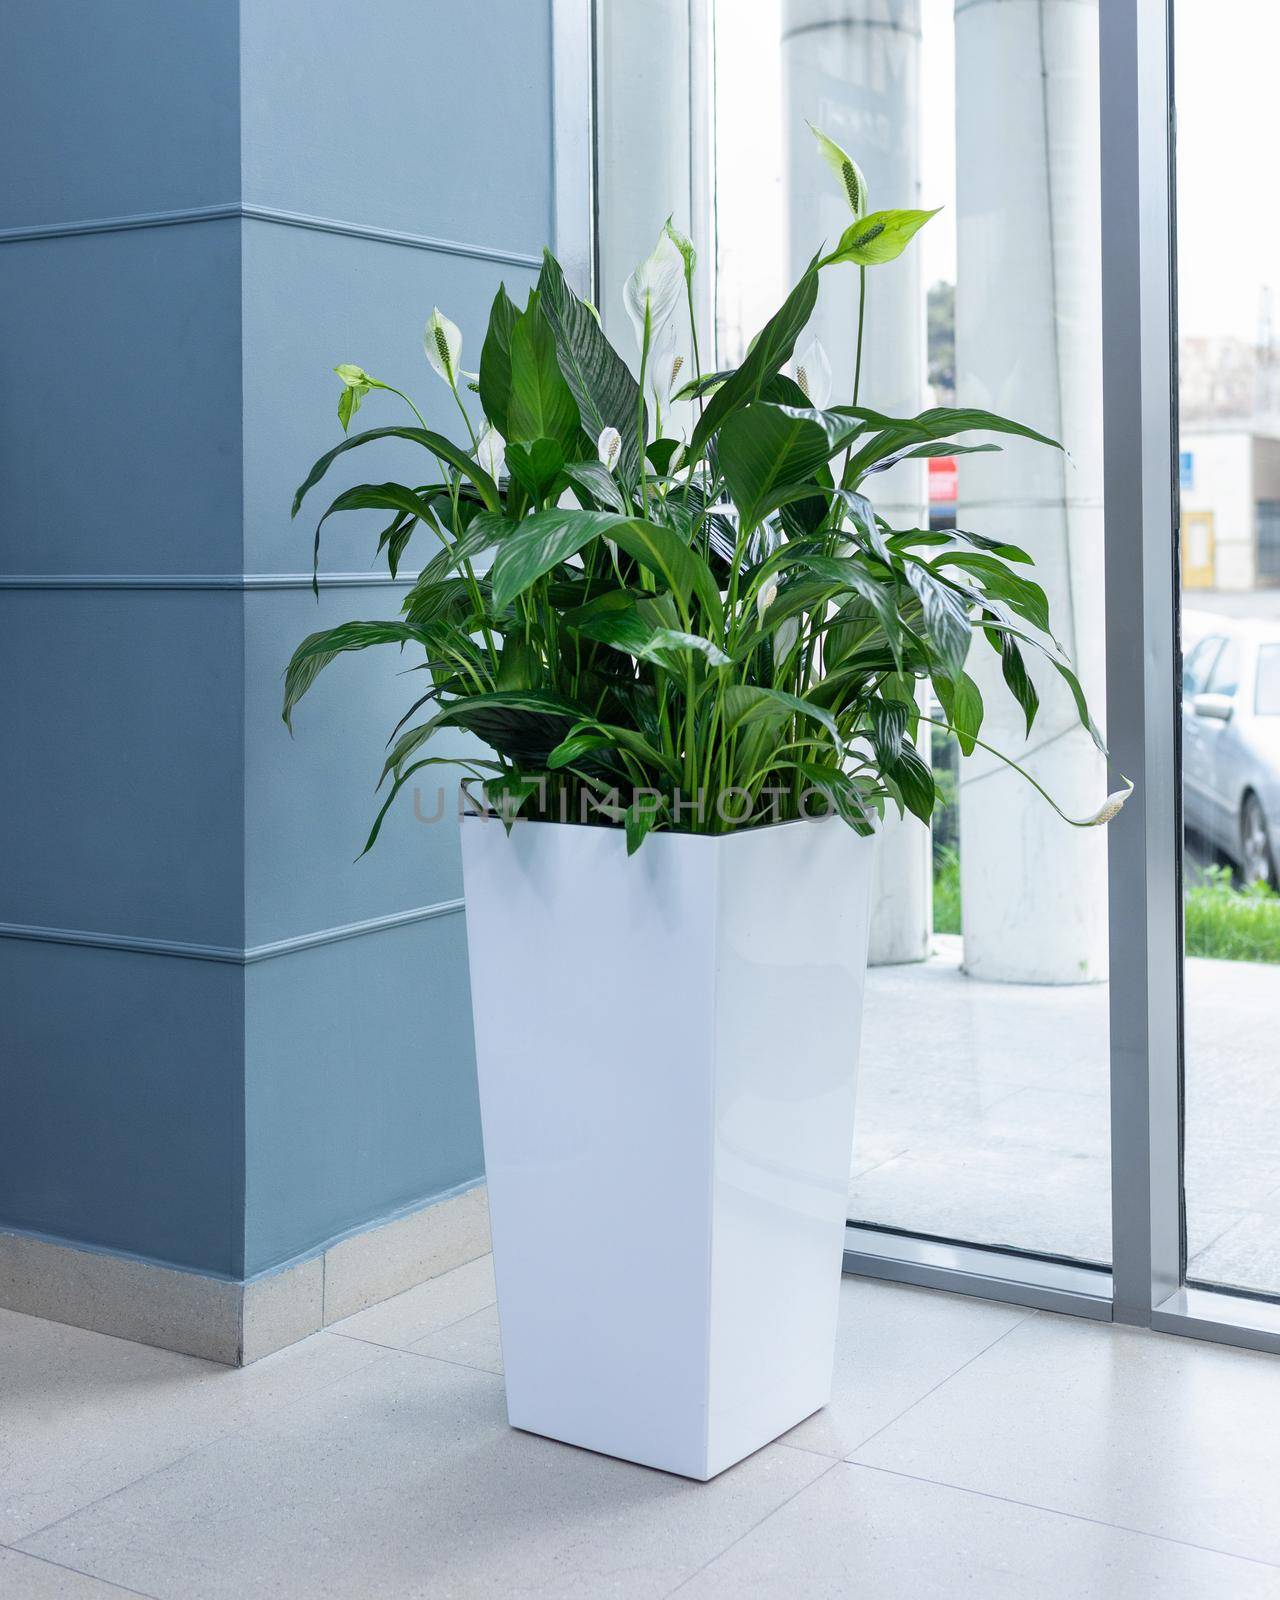 Big Peace Lily plant in white pot at the office by ferhad